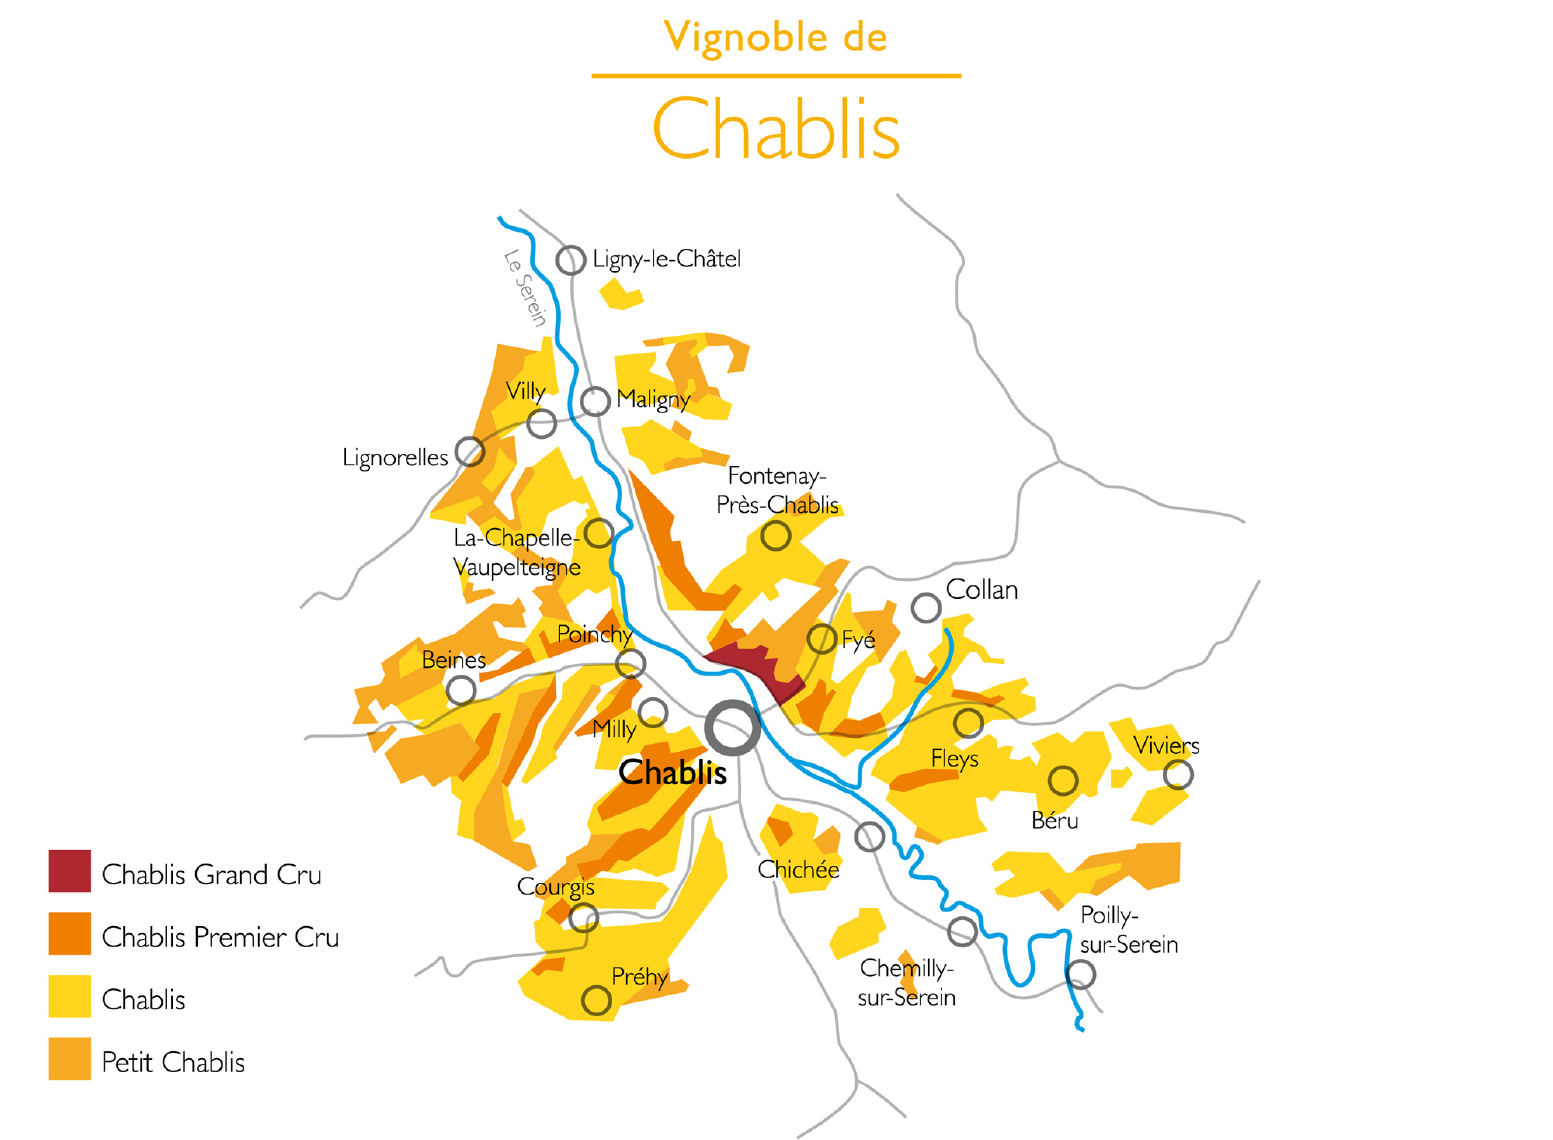 The map of Chablis appellations